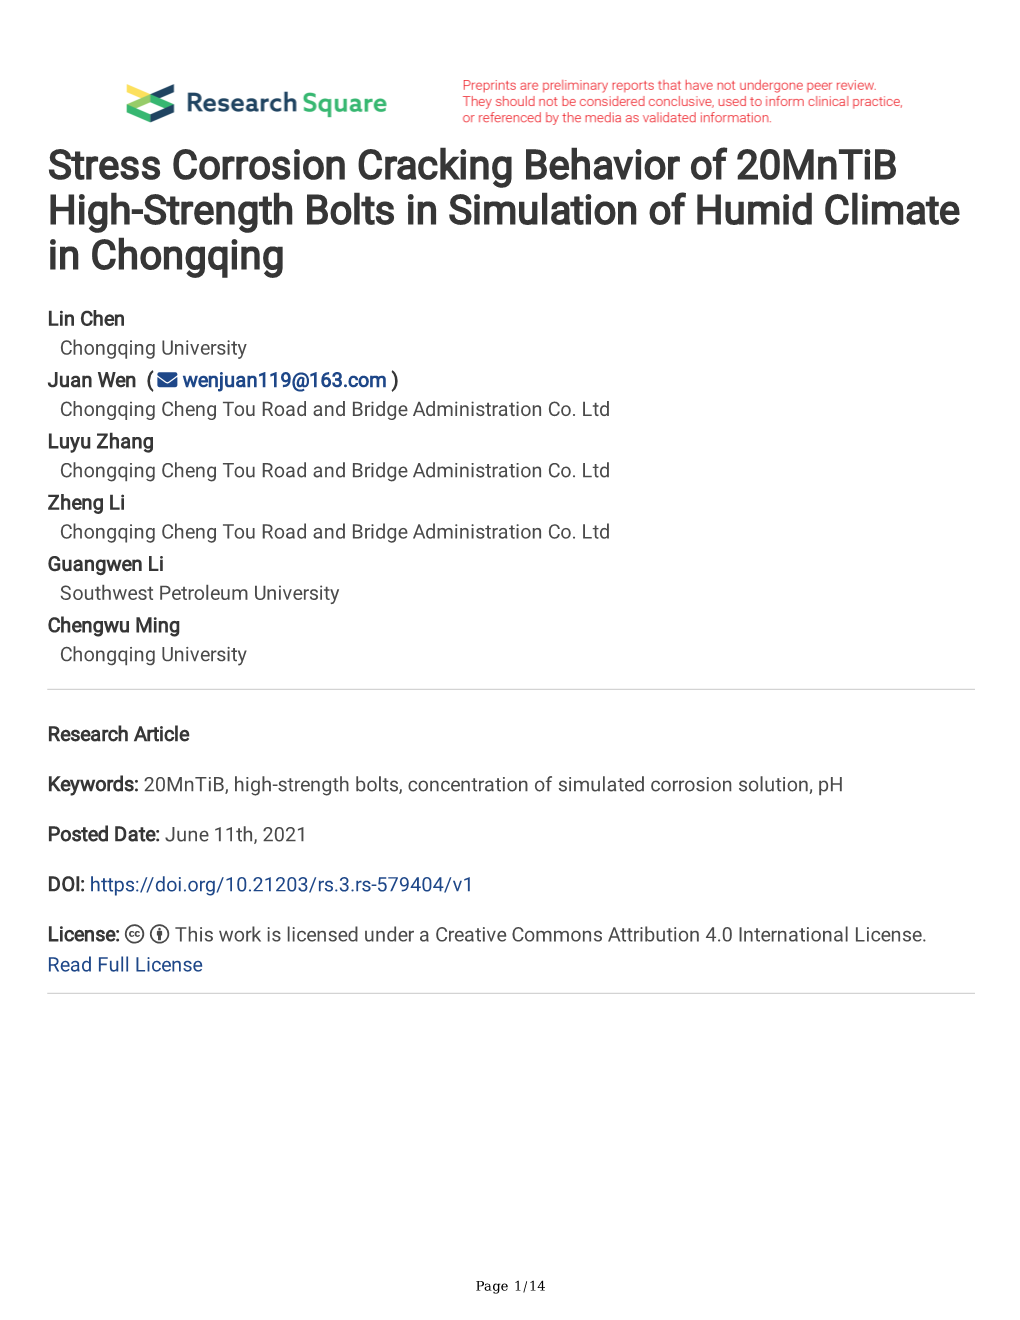 Stress Corrosion Cracking Behavior of 20Mntib High-Strength Bolts in Simulation of Humid Climate in Chongqing